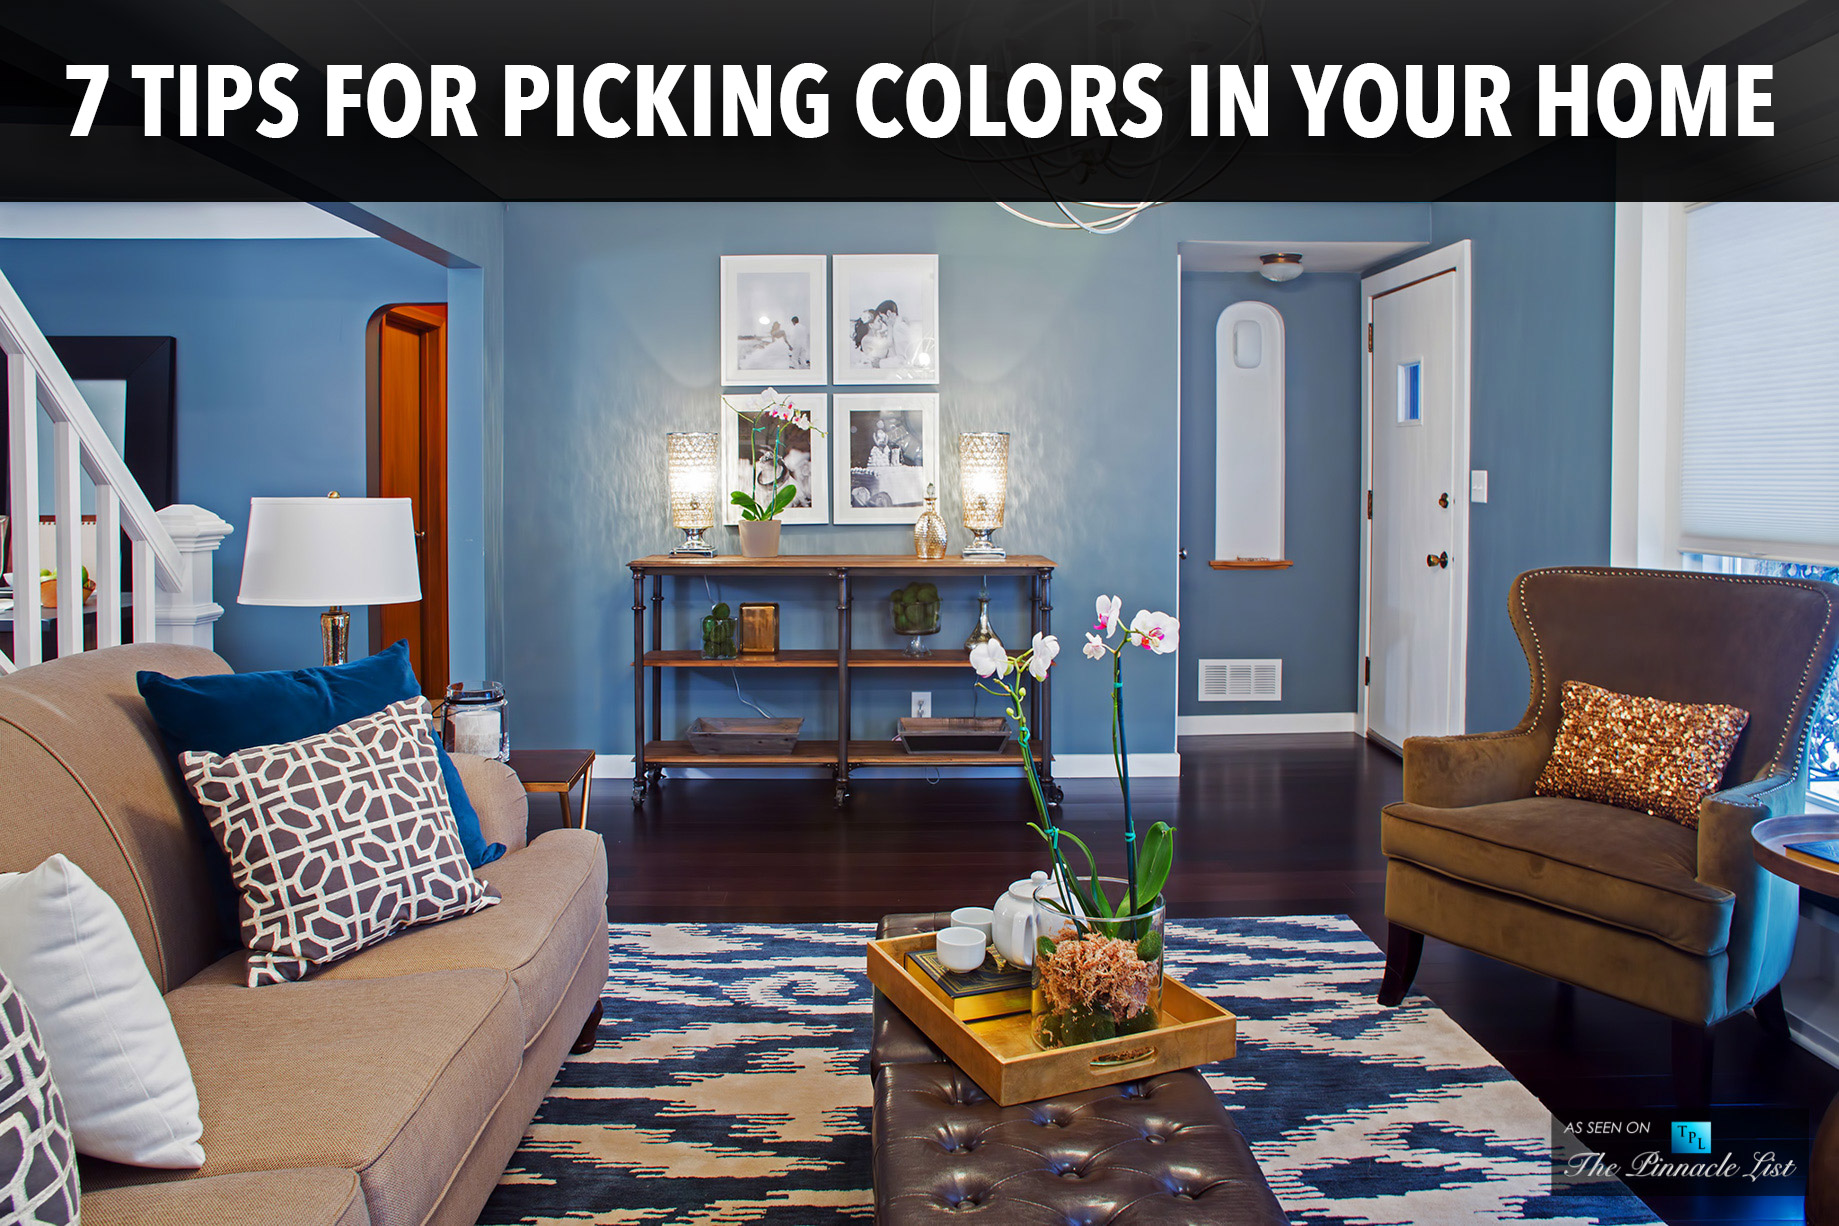 7 Tips for Picking Colors in Your Home